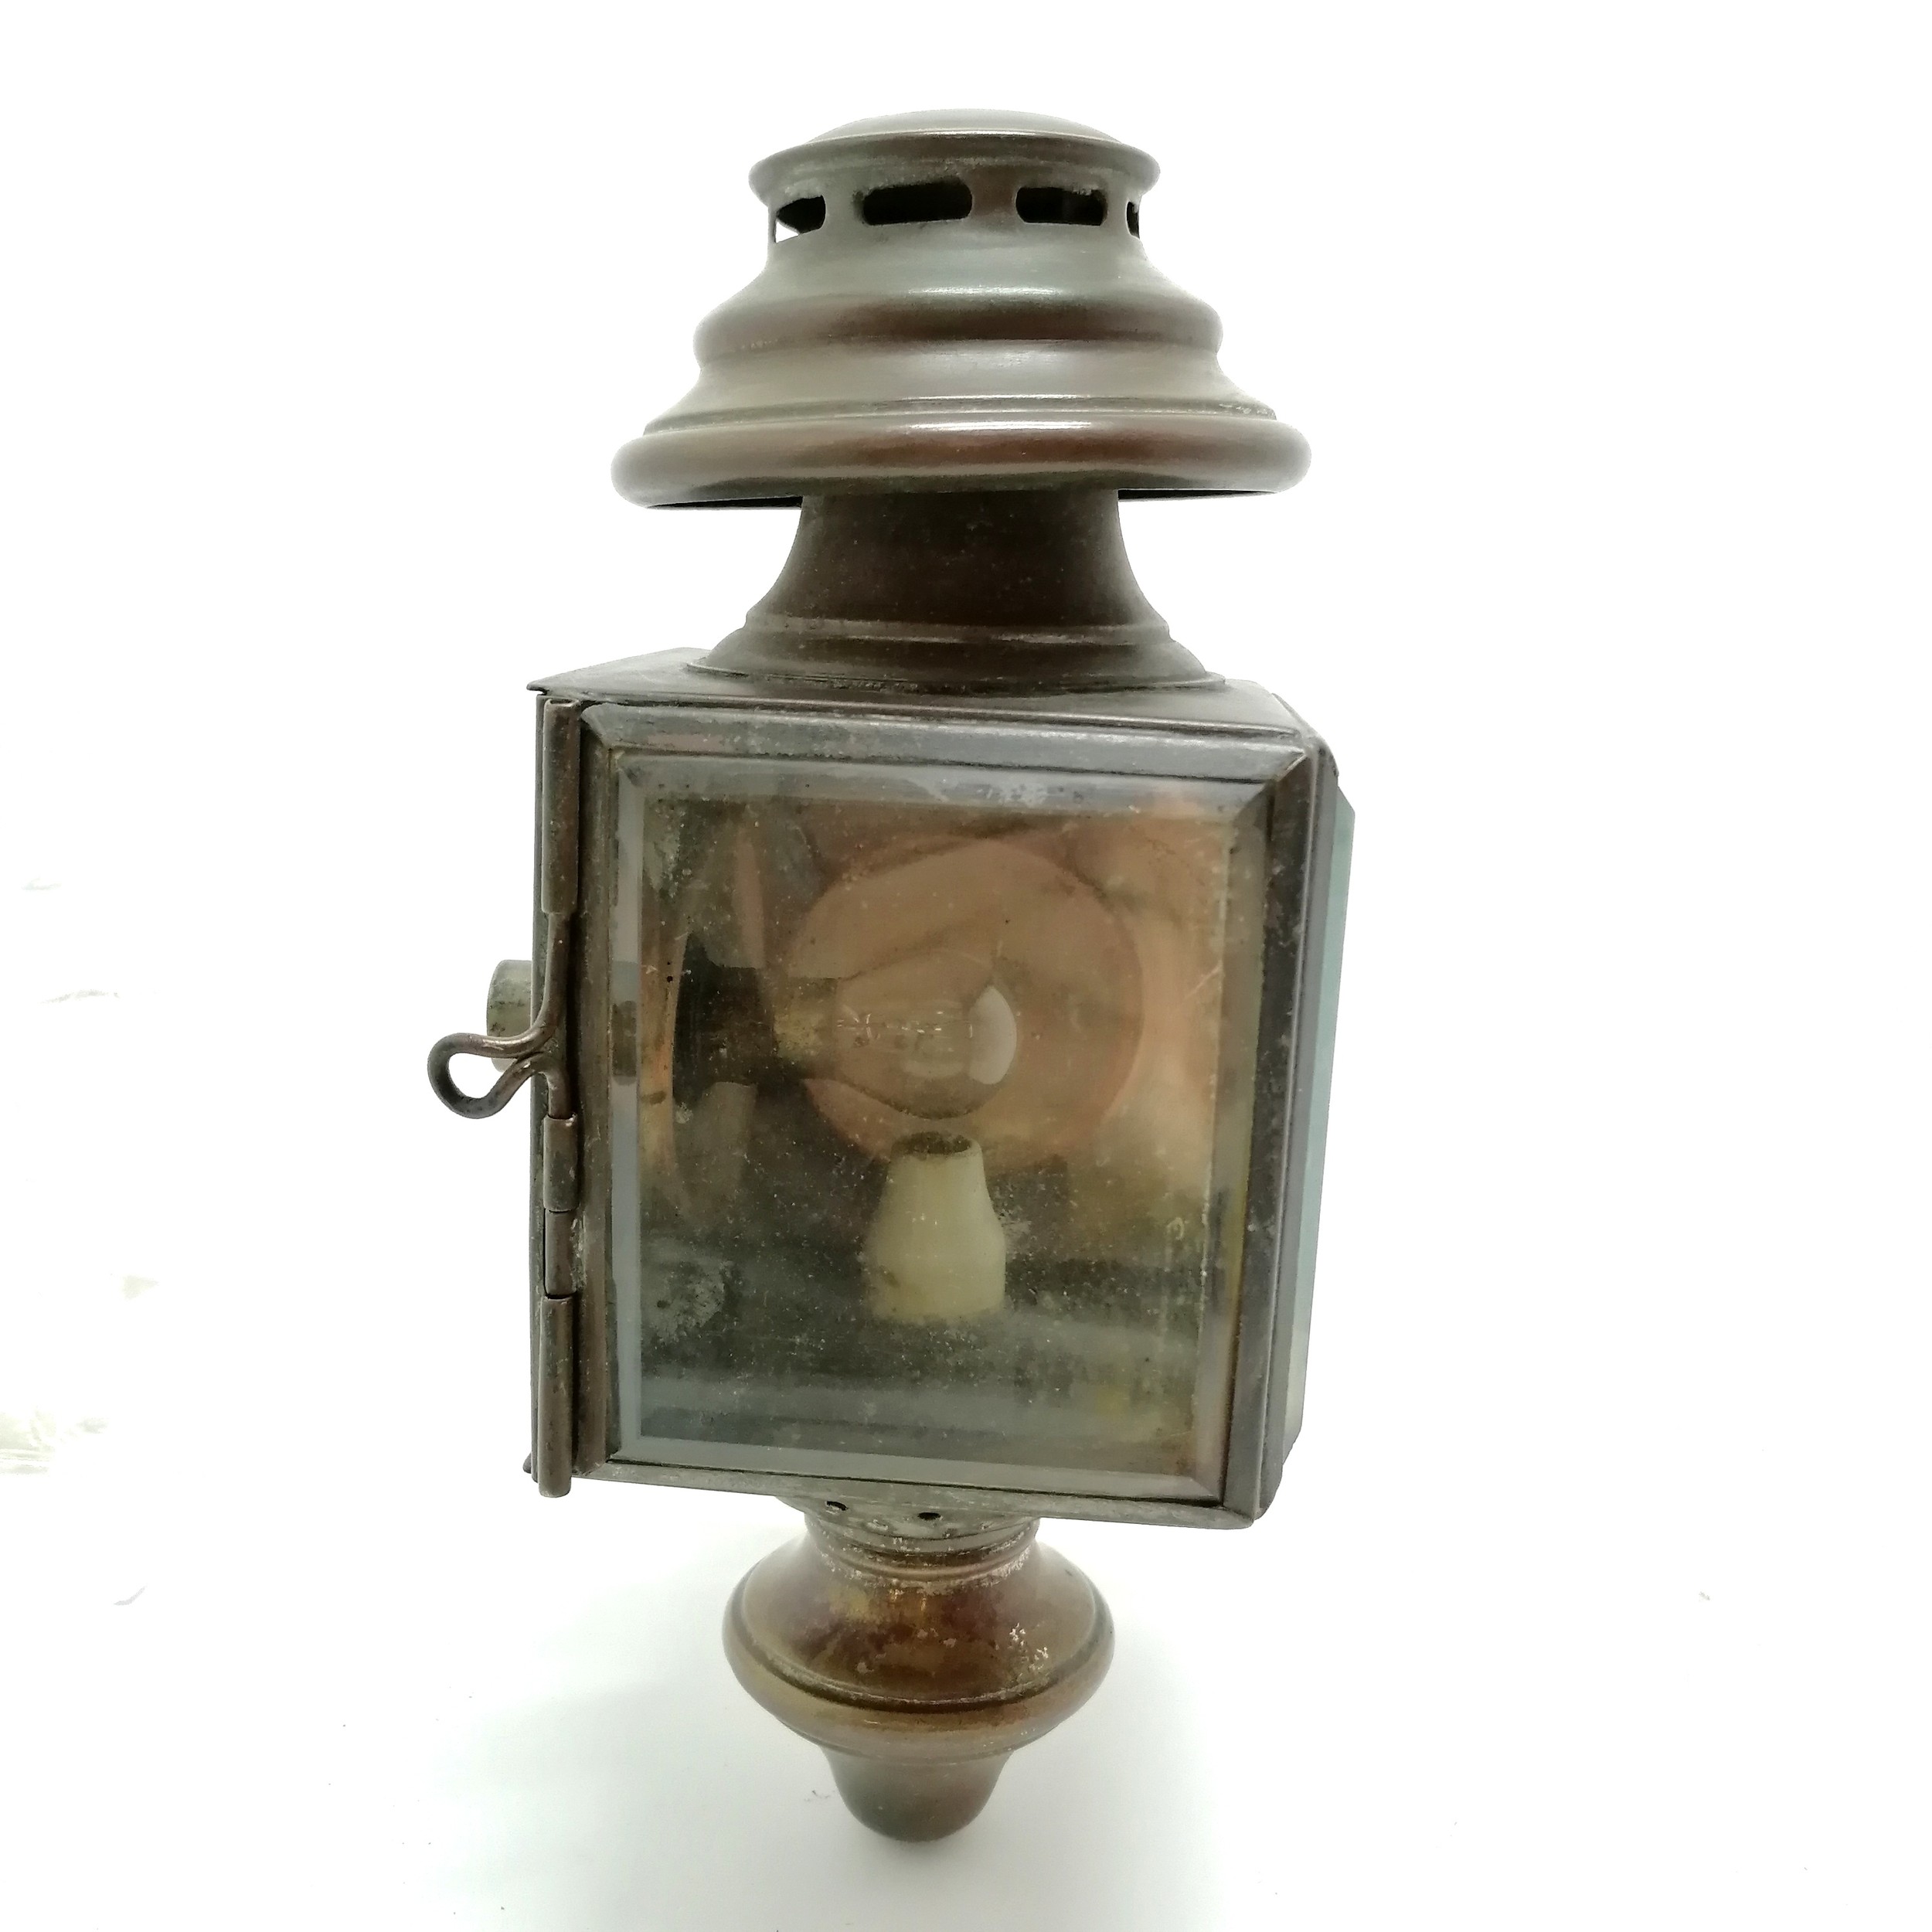 Antique BRC carriage / car lamp - 25cm high with old repairs but no obvious damage